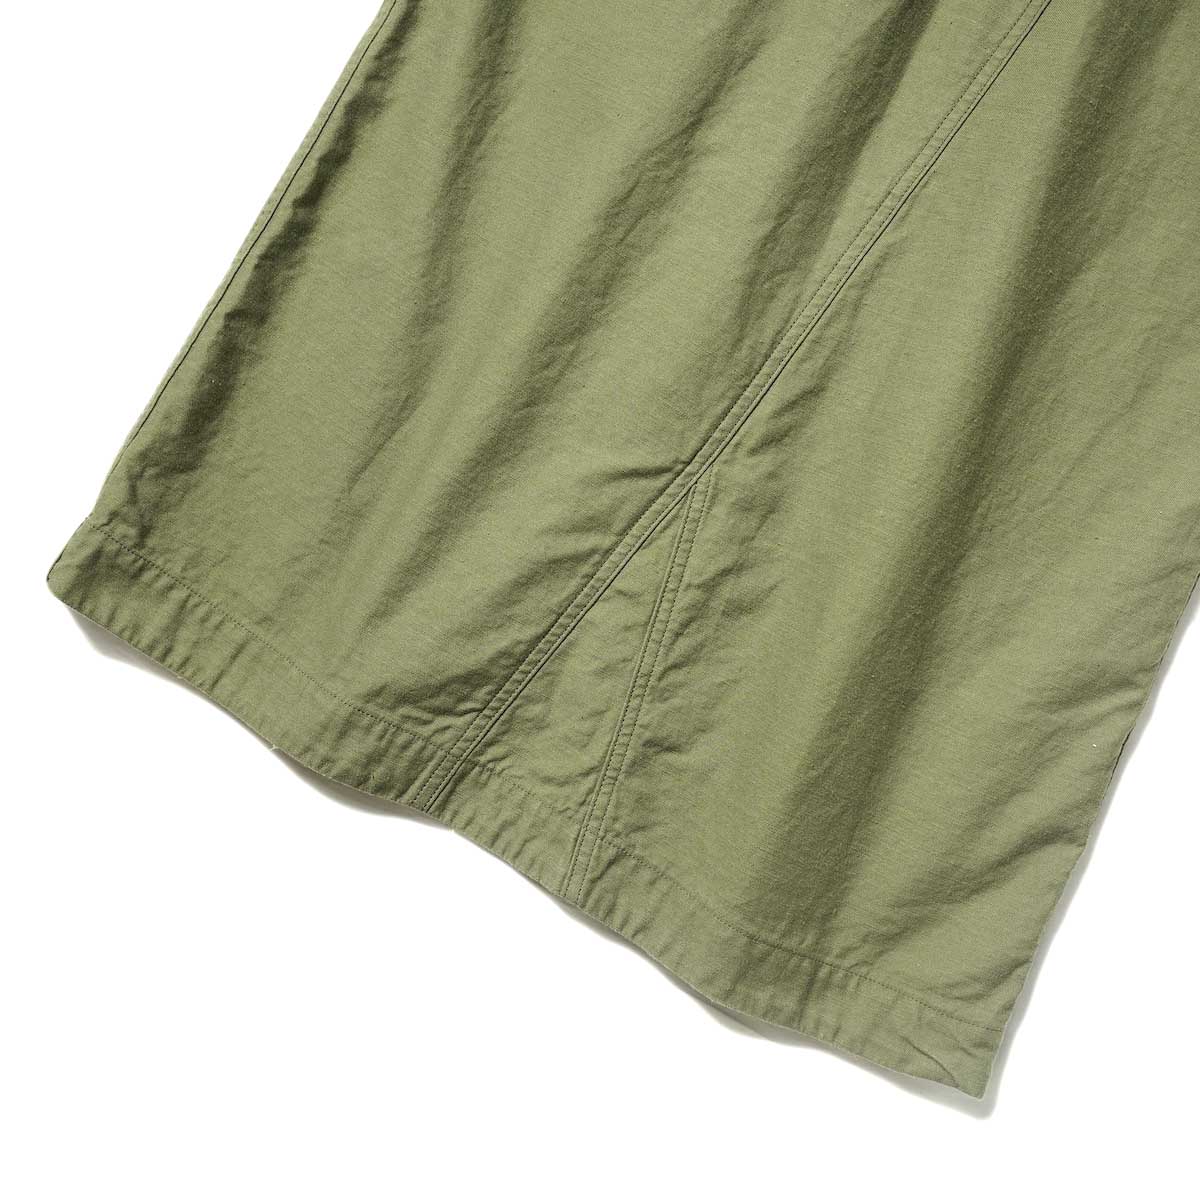 Needles / String Fatigue Skirt - Back Sateen (Olive) 背面・裾